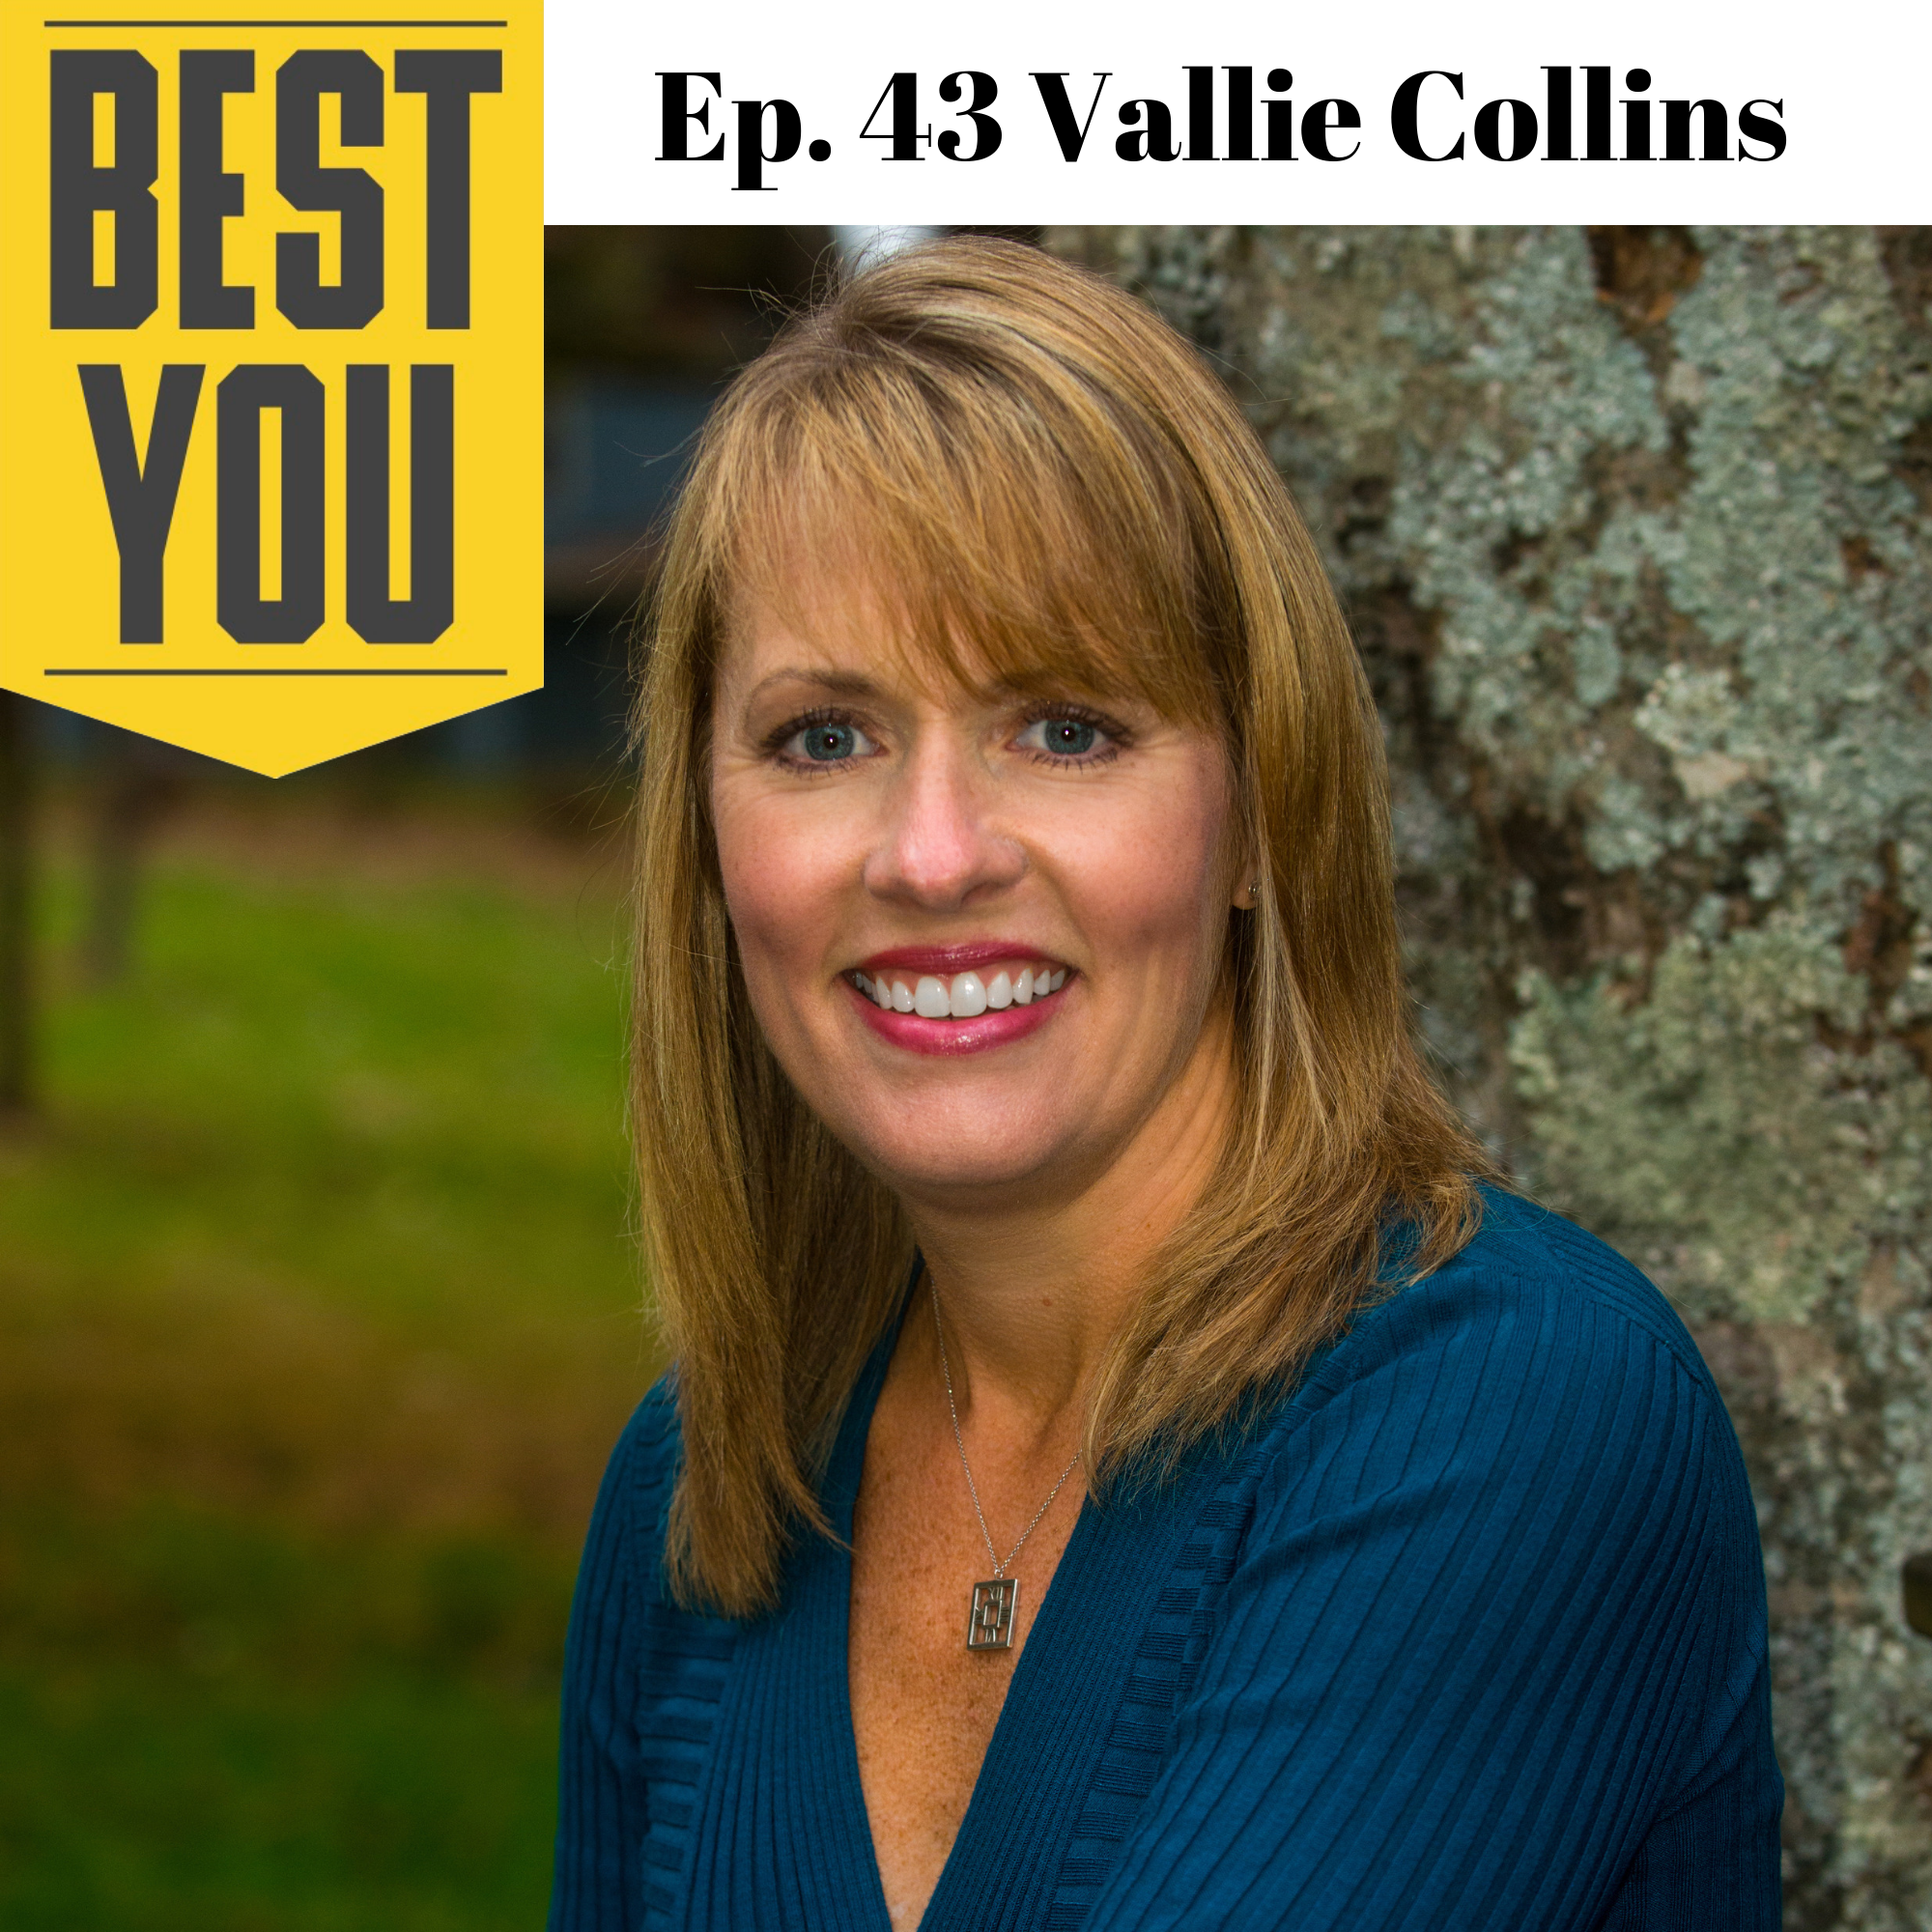 Ep. 86 Vallie Collins - Miracle on the Hudson